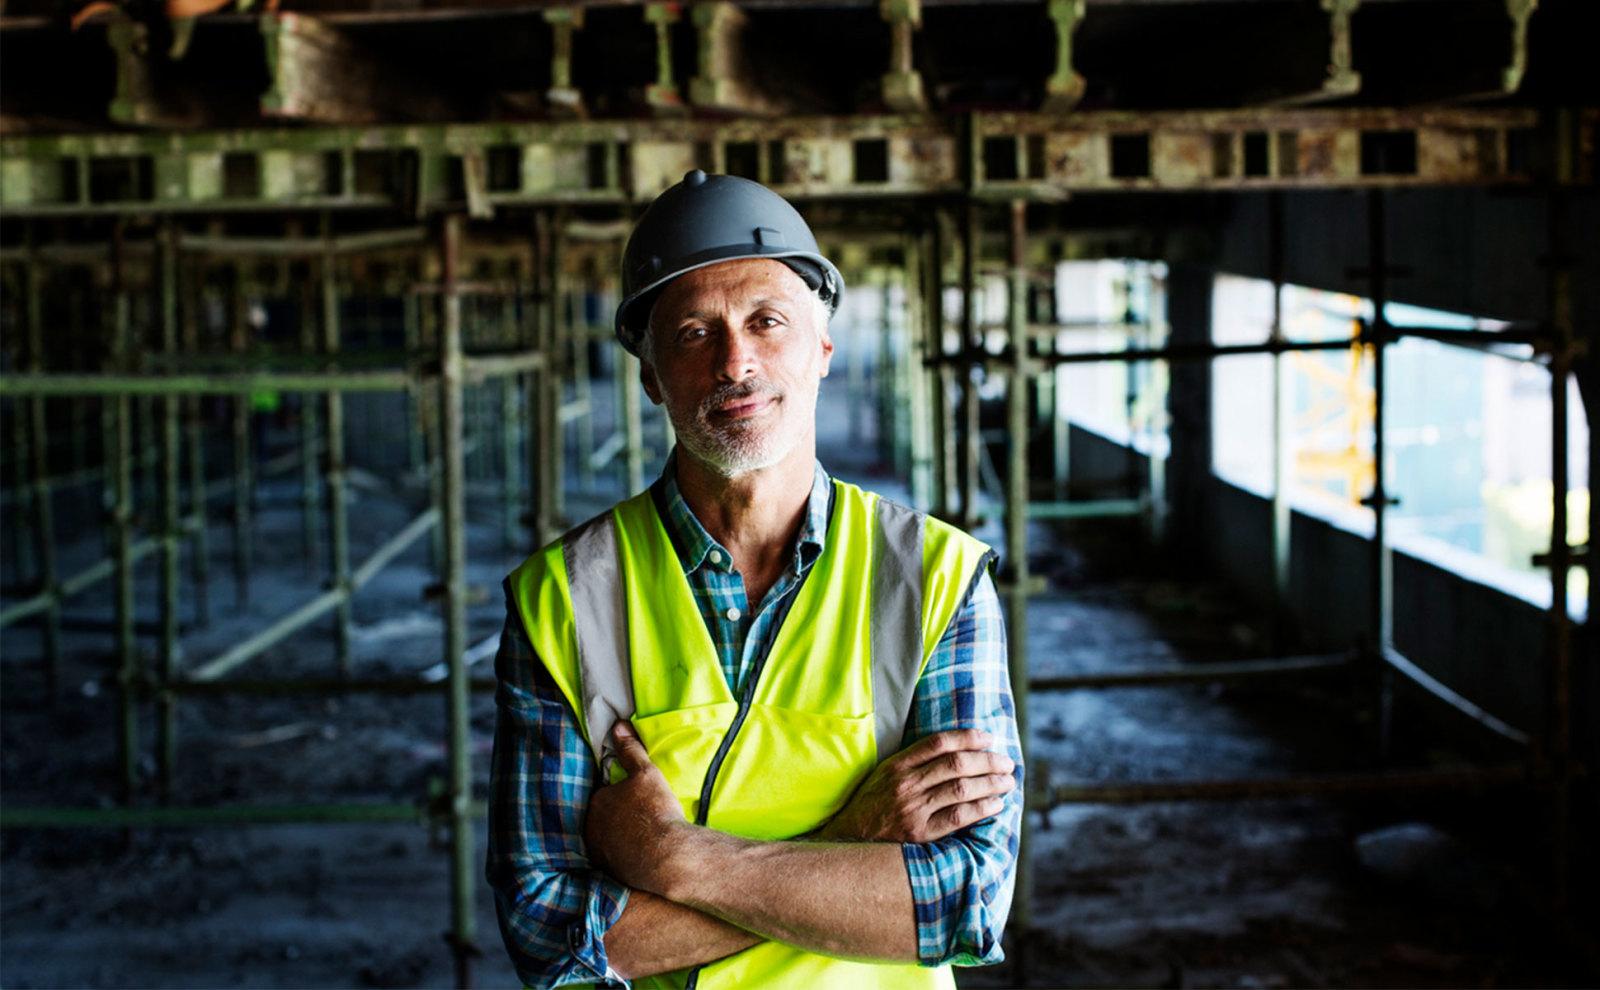 The Victorian 2023-24 budget has outlined funding and initiatives to support apprentices and boost workers retraining and entering the construction industry and other key sectors.